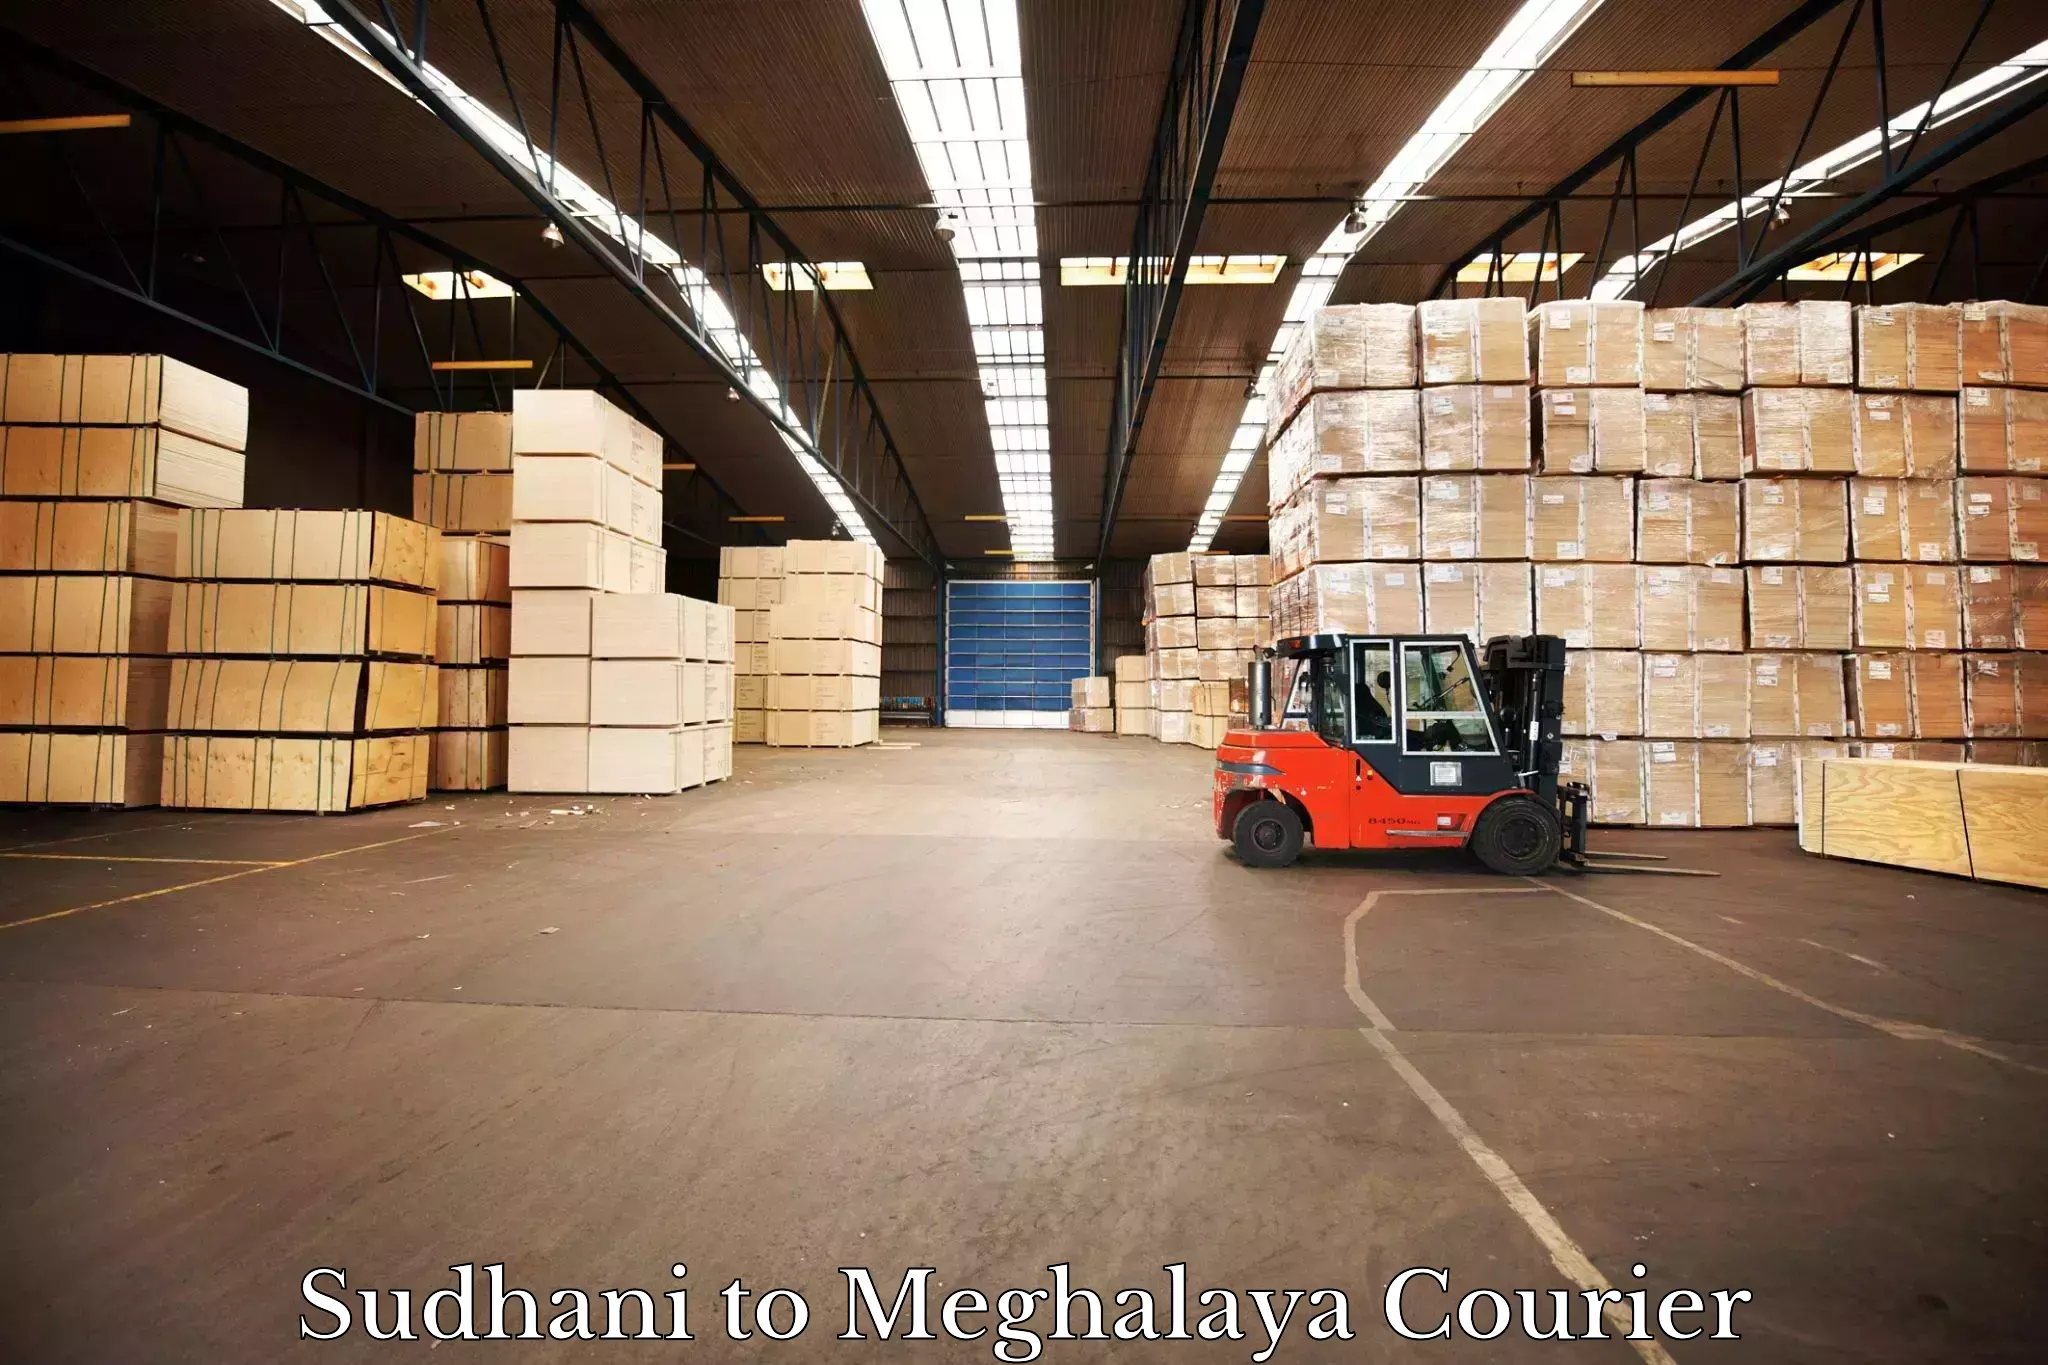 Courier service efficiency Sudhani to Meghalaya